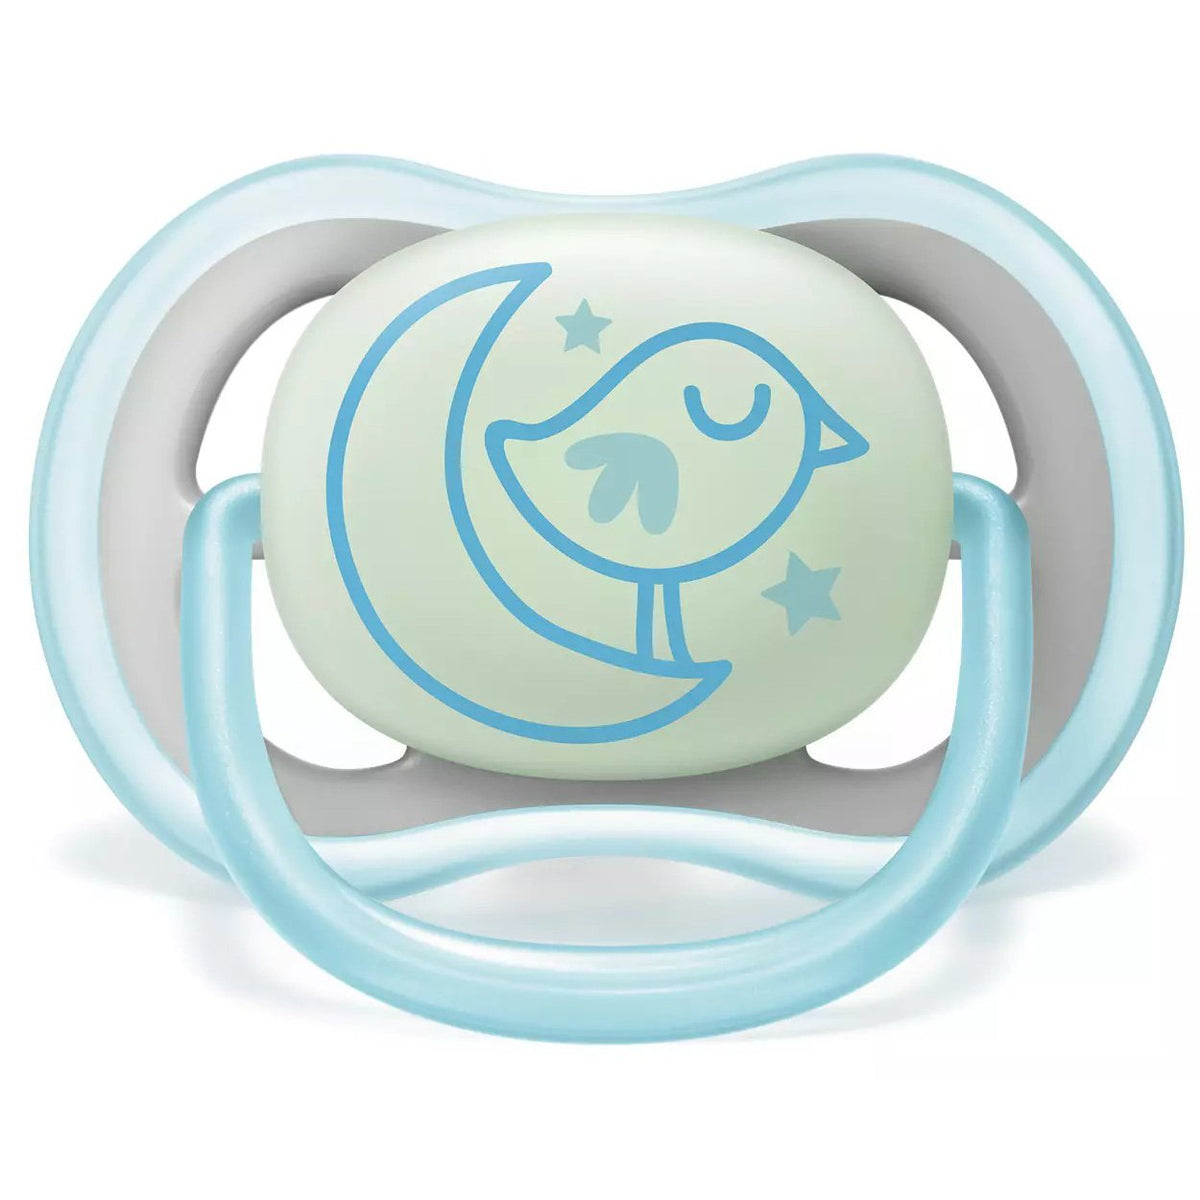 philips-avent-ultra-air-pacifier- (6)